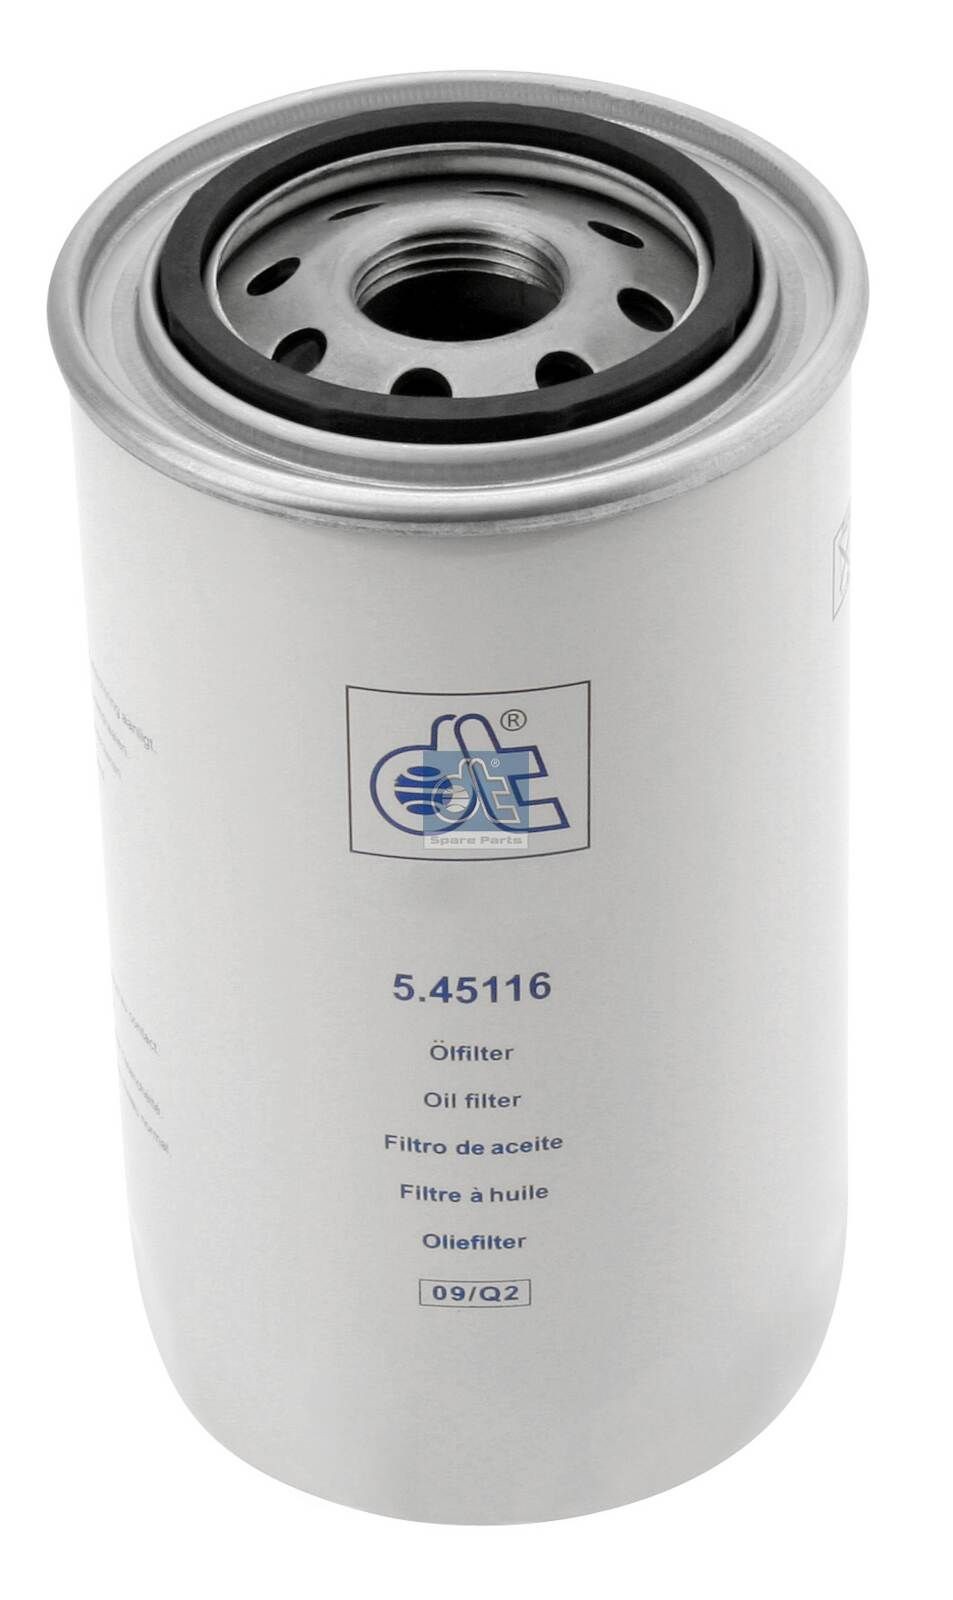 H19W10 DT Spare Parts 5.45116 Oil filter 152 9642